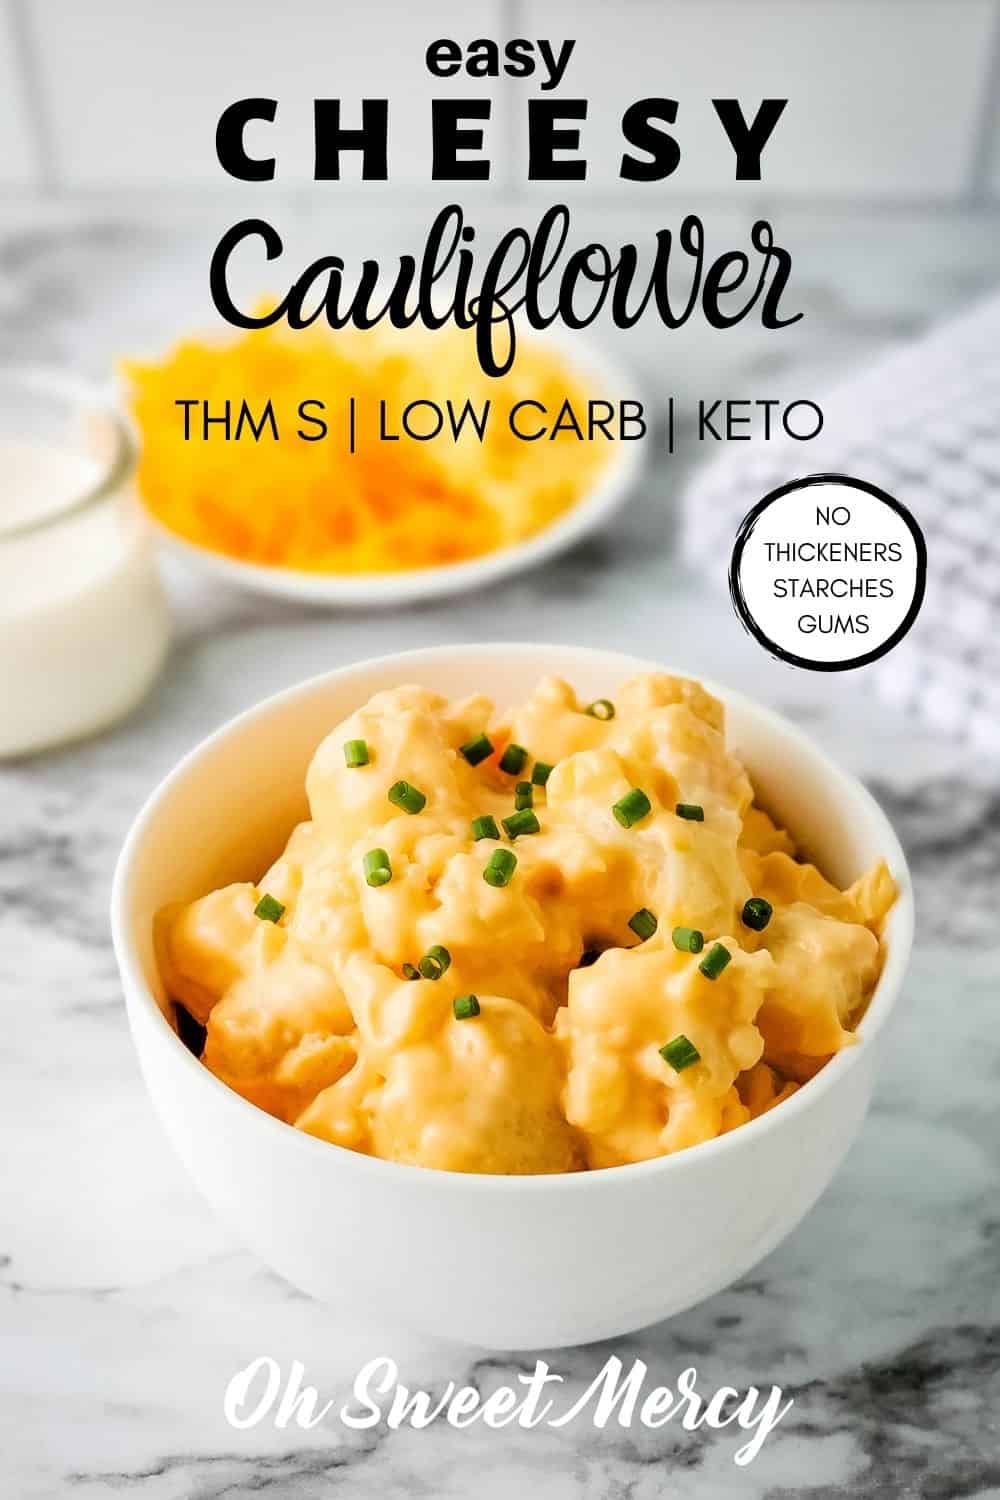 Creamy, cheesy cauliflower makes a perfect low carb side dish. My easy low carb cheesy cauliflower is made without thickeners of any kind, so no starches, flours, or gums! Ready in less than 30 minutes, too! #thm #lowcarb #keto #grainfree #glutenfree #easy @ohsweetmercy